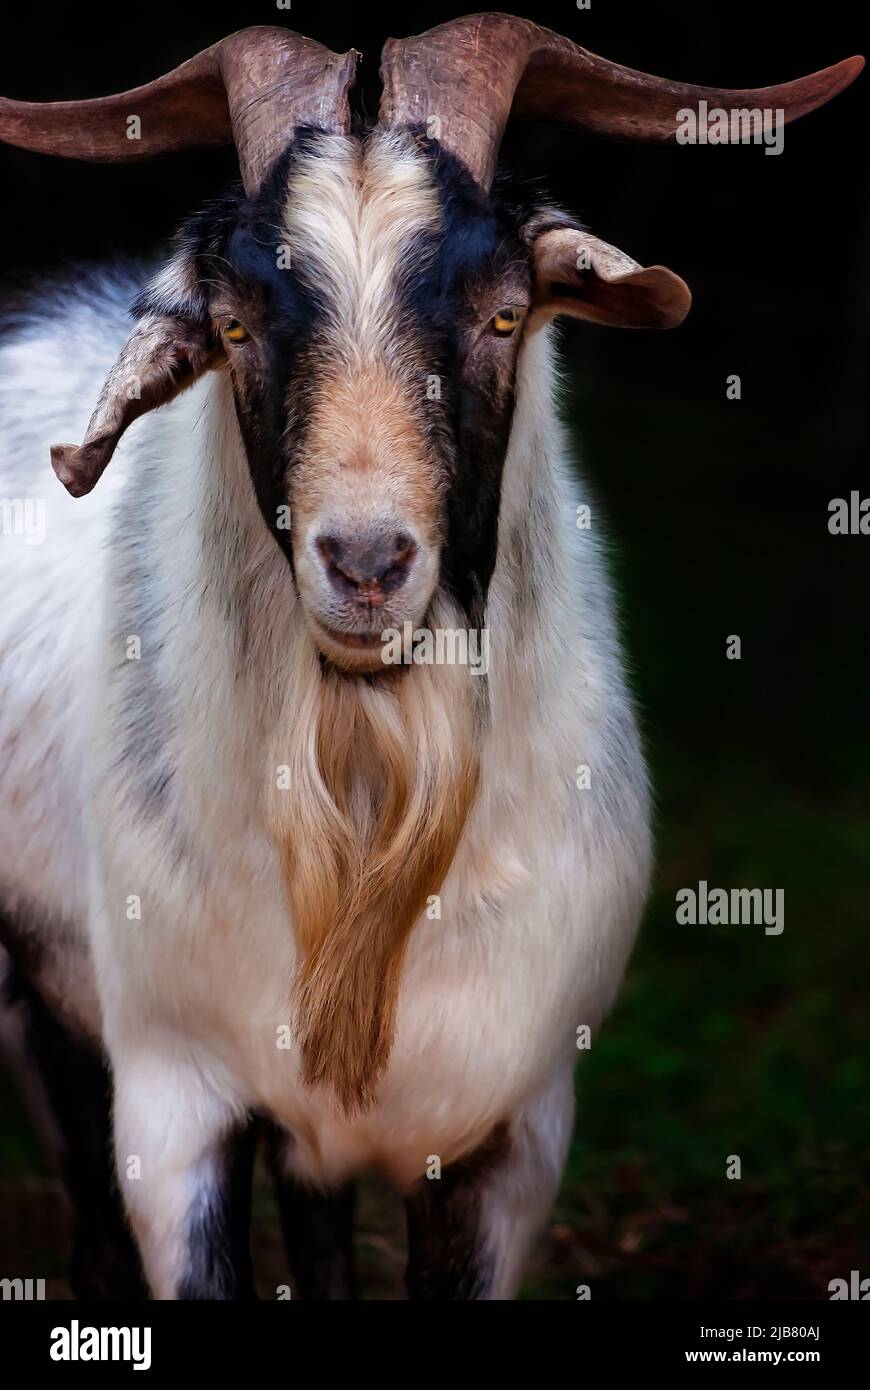 Sir Stankalot, a pet pygmy goat (Capra hircus), is pictured, March 29, 2011, in Mobile, Alabama. Stock Photo